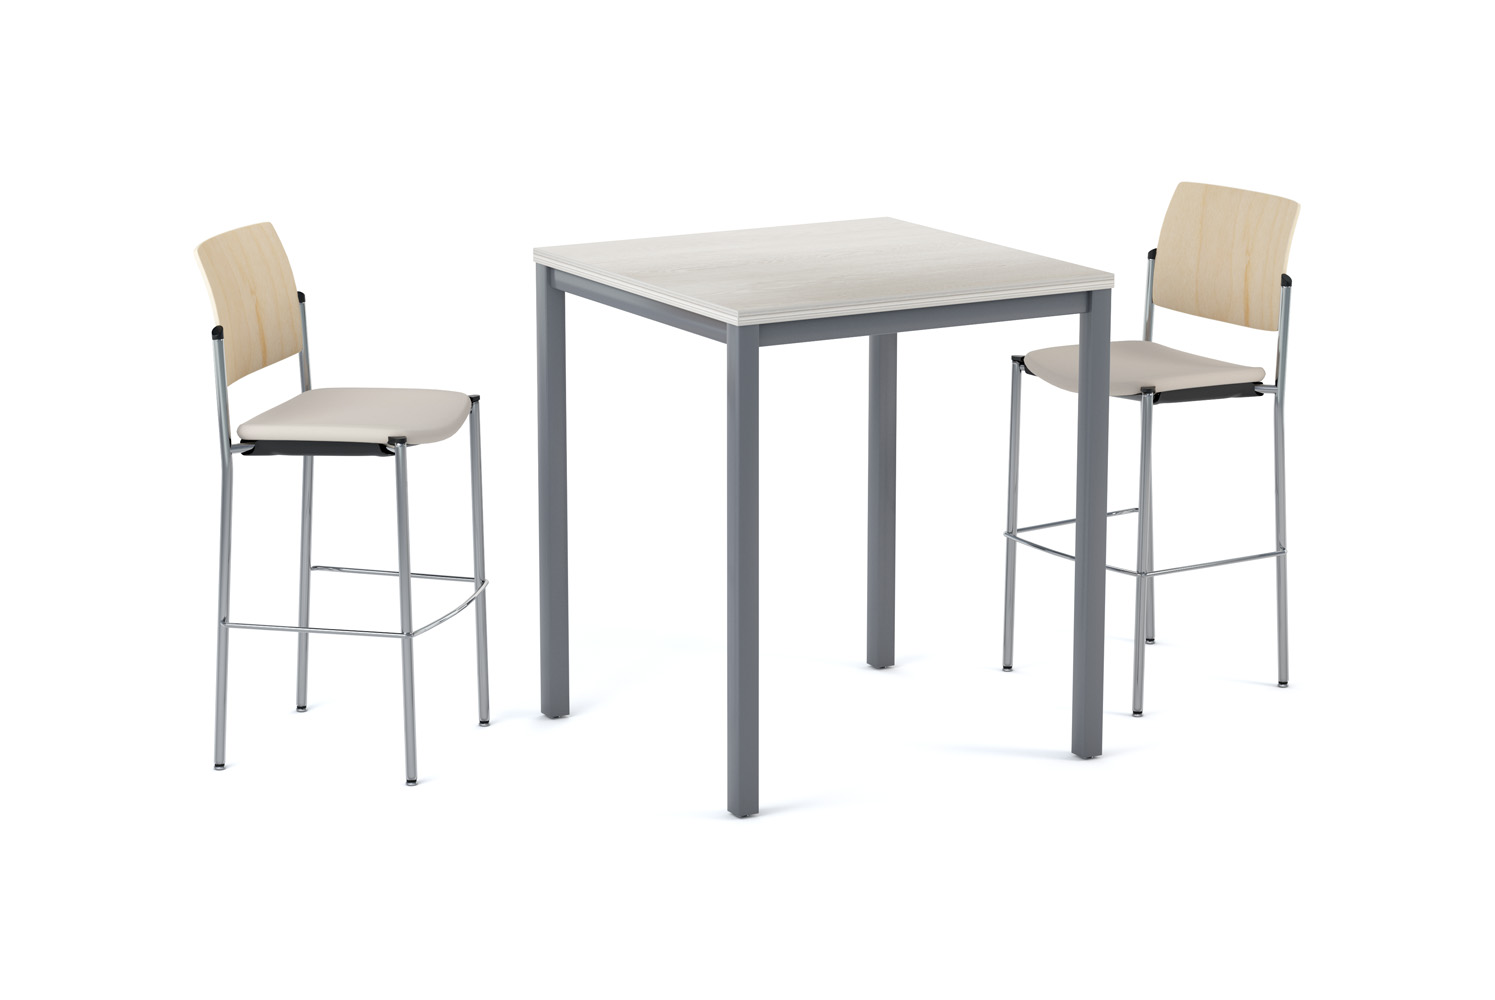 Pisa Bar Height Table with Bruno Stools